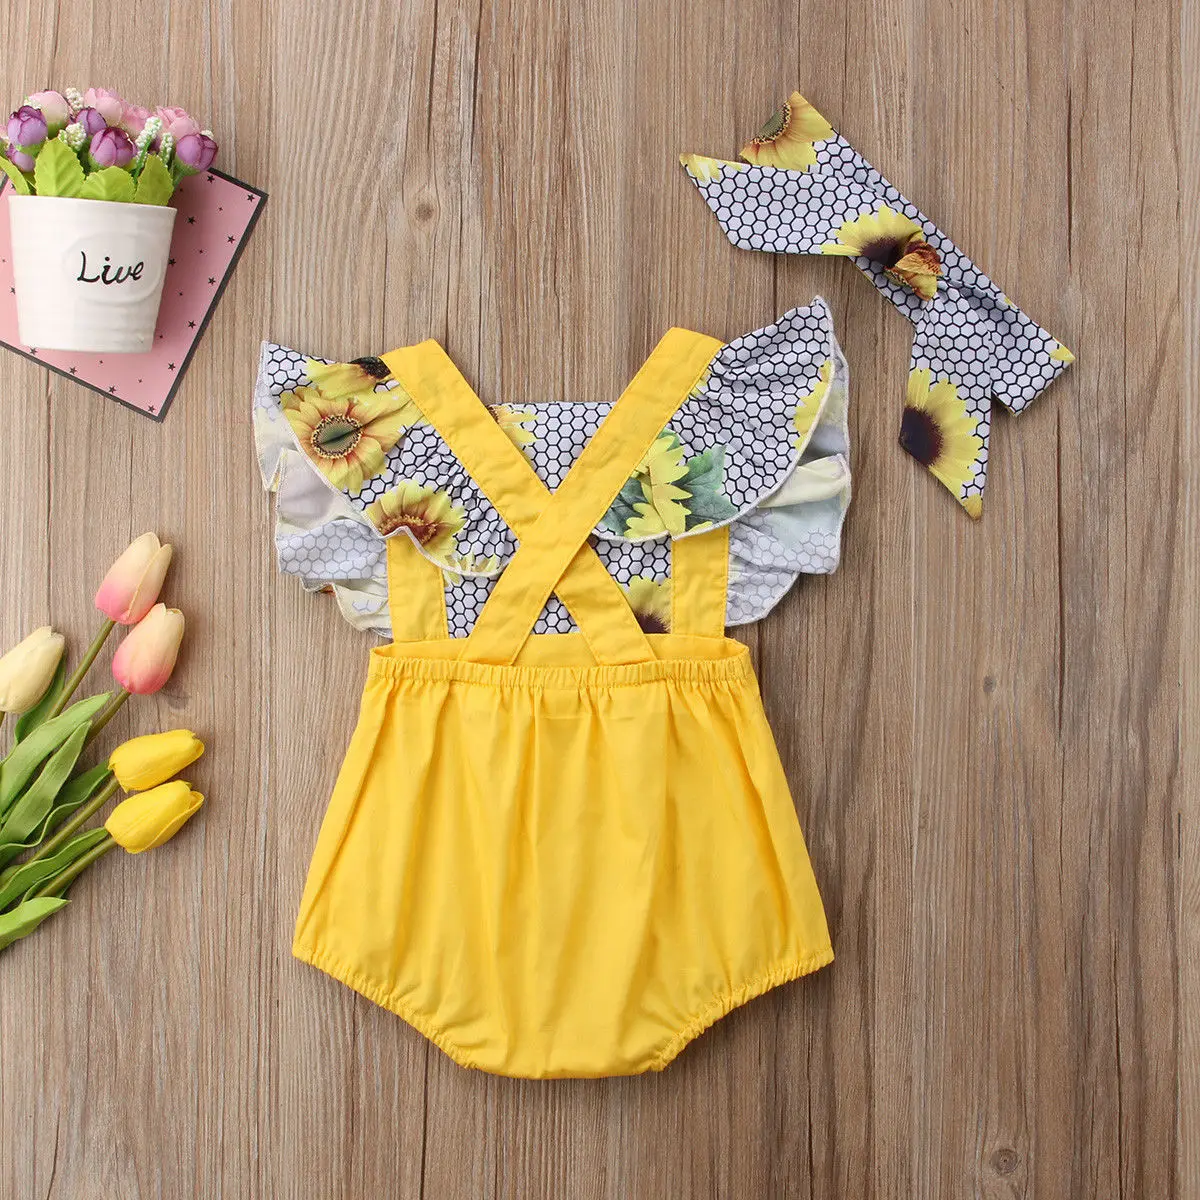 

New Baby Girls Ruffles Sunflower Romper Infant Fake two pieces Jumpsuit Outfit Newborn Sunsuit Clothes baby clothing